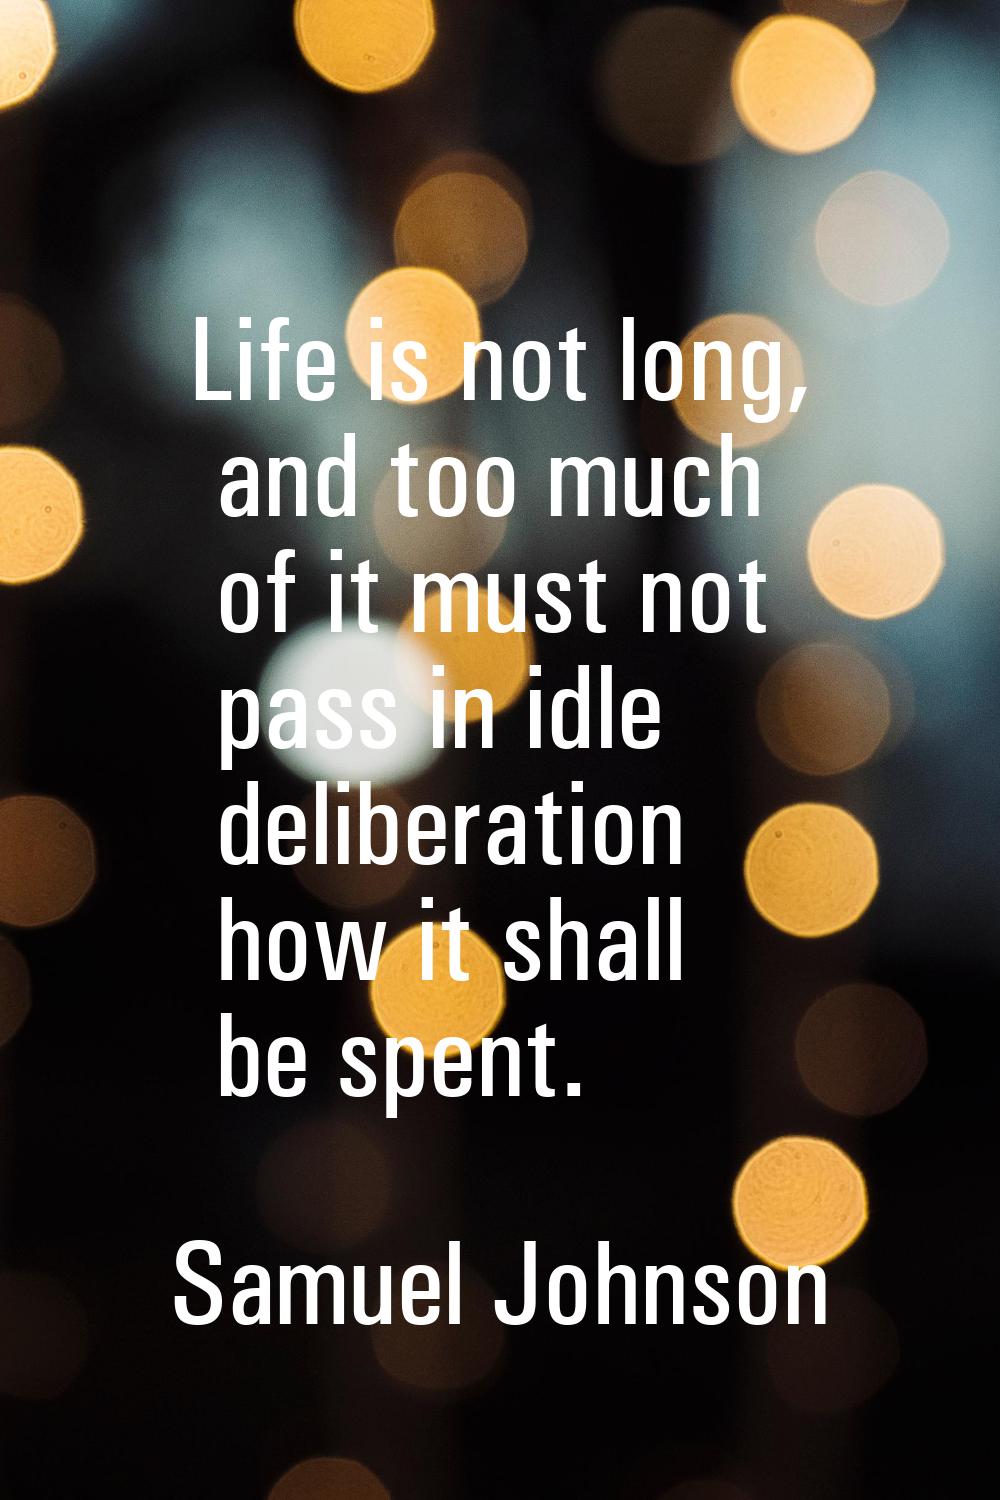 Life is not long, and too much of it must not pass in idle deliberation how it shall be spent.